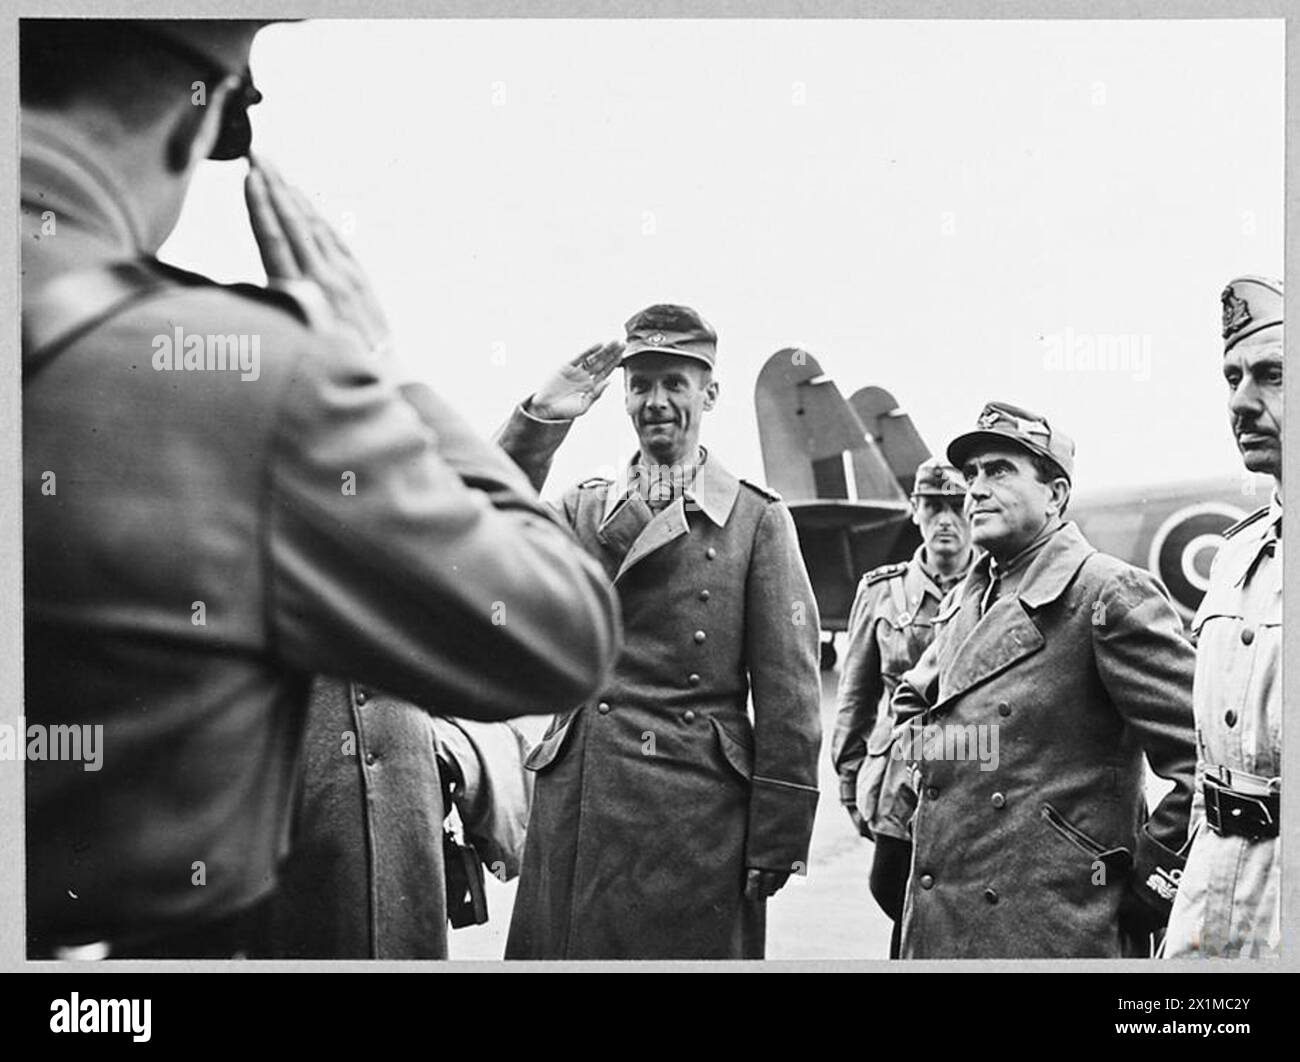 AXIS GENERALS ARRIVE IN SOUTH OF ENGLAND AS PRISONERS OF WAR. - 9958. Picture (issued 1943) shows - Colonel von Hulsen salutes when asked his name; Captain Colombo [in background] Brigadier General Mancinellis [foreground] and Brigadier General Boschi [extreme right] look on, Royal Air Force Stock Photo